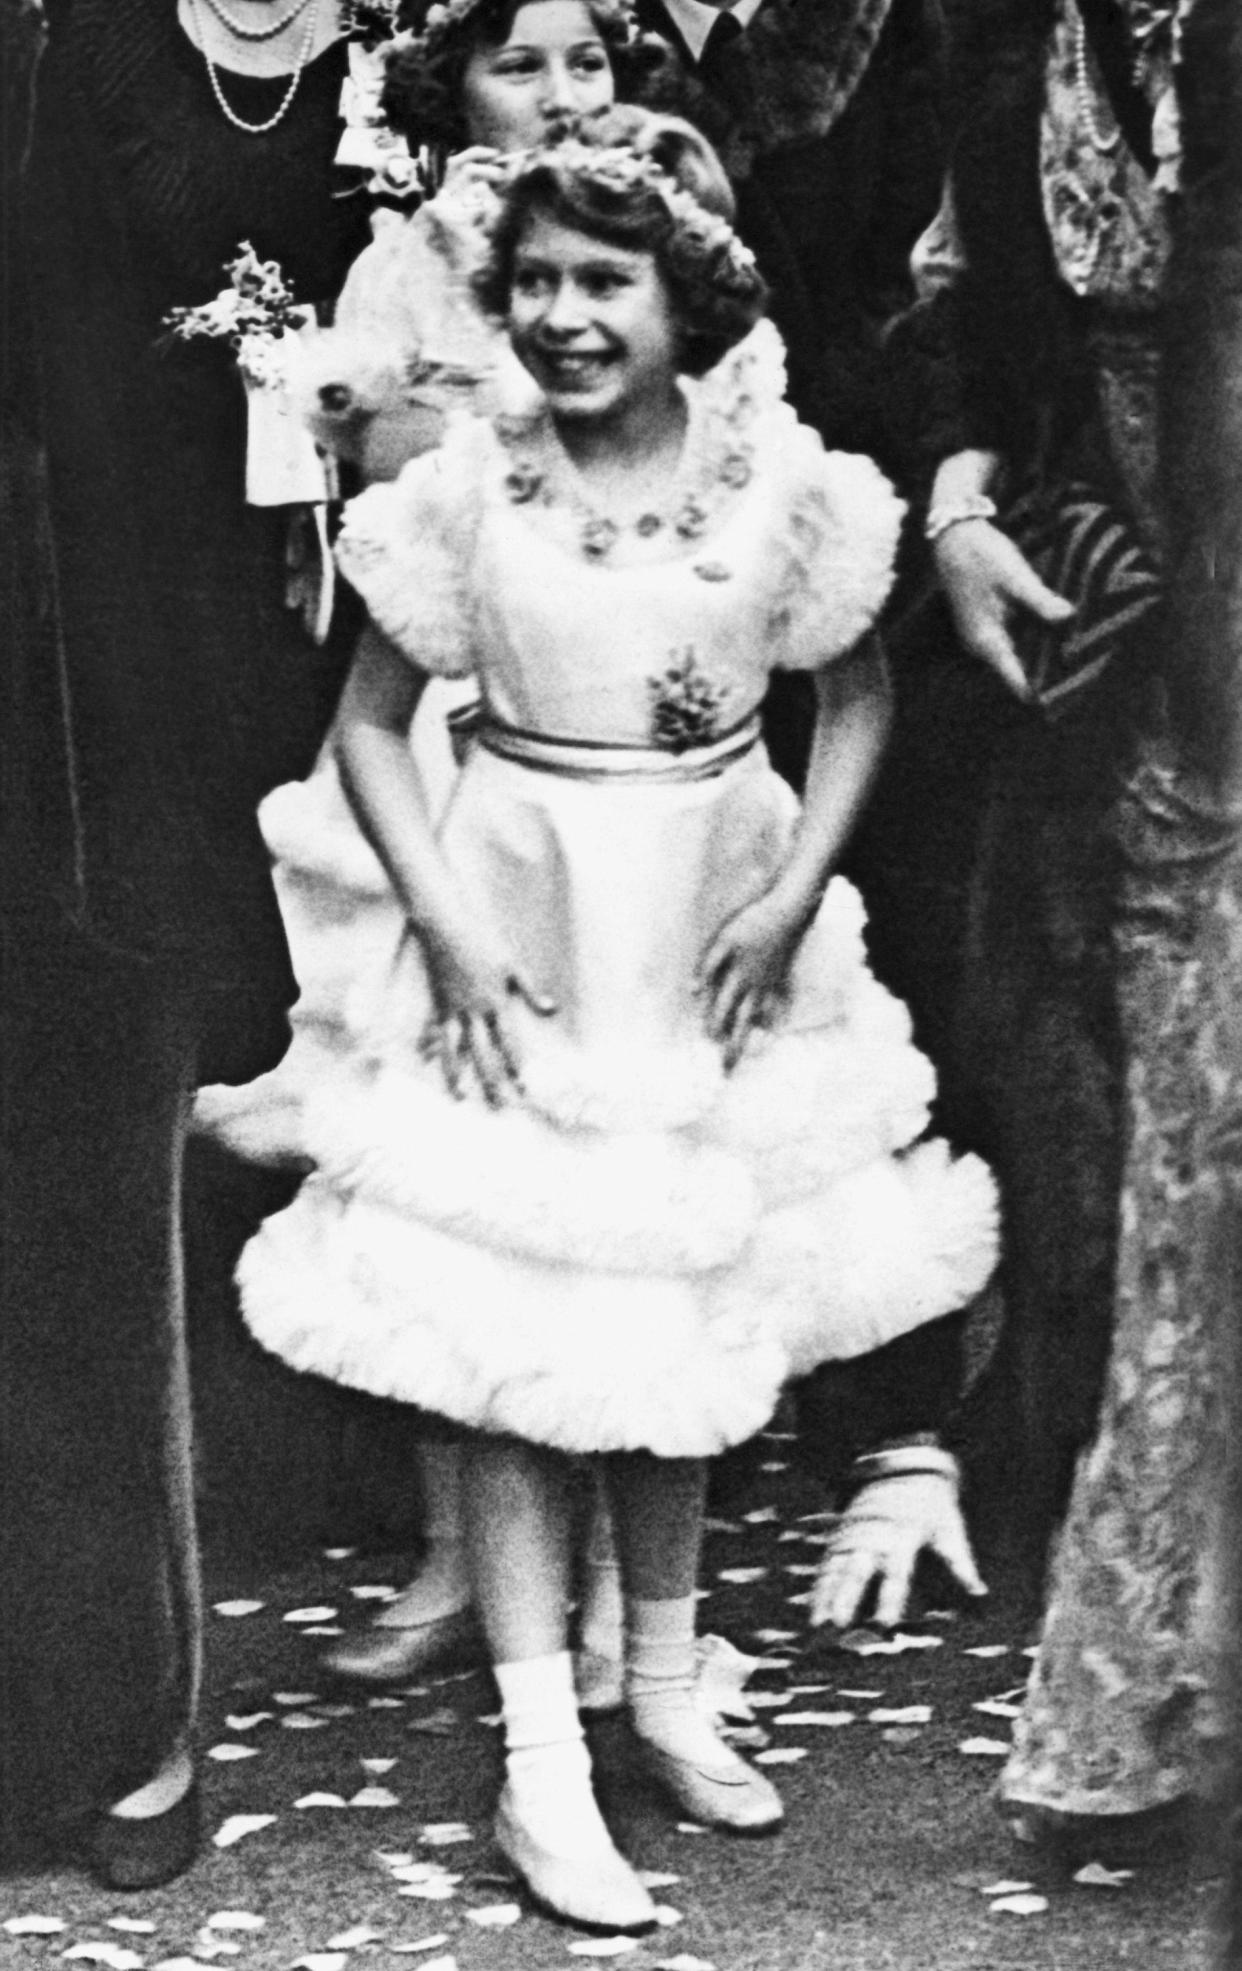 Princess Elizabeth, then aged 9, after the wedding of the Duke of Gloucester and Lady Alice Scott shown Nov. 6, 1935.